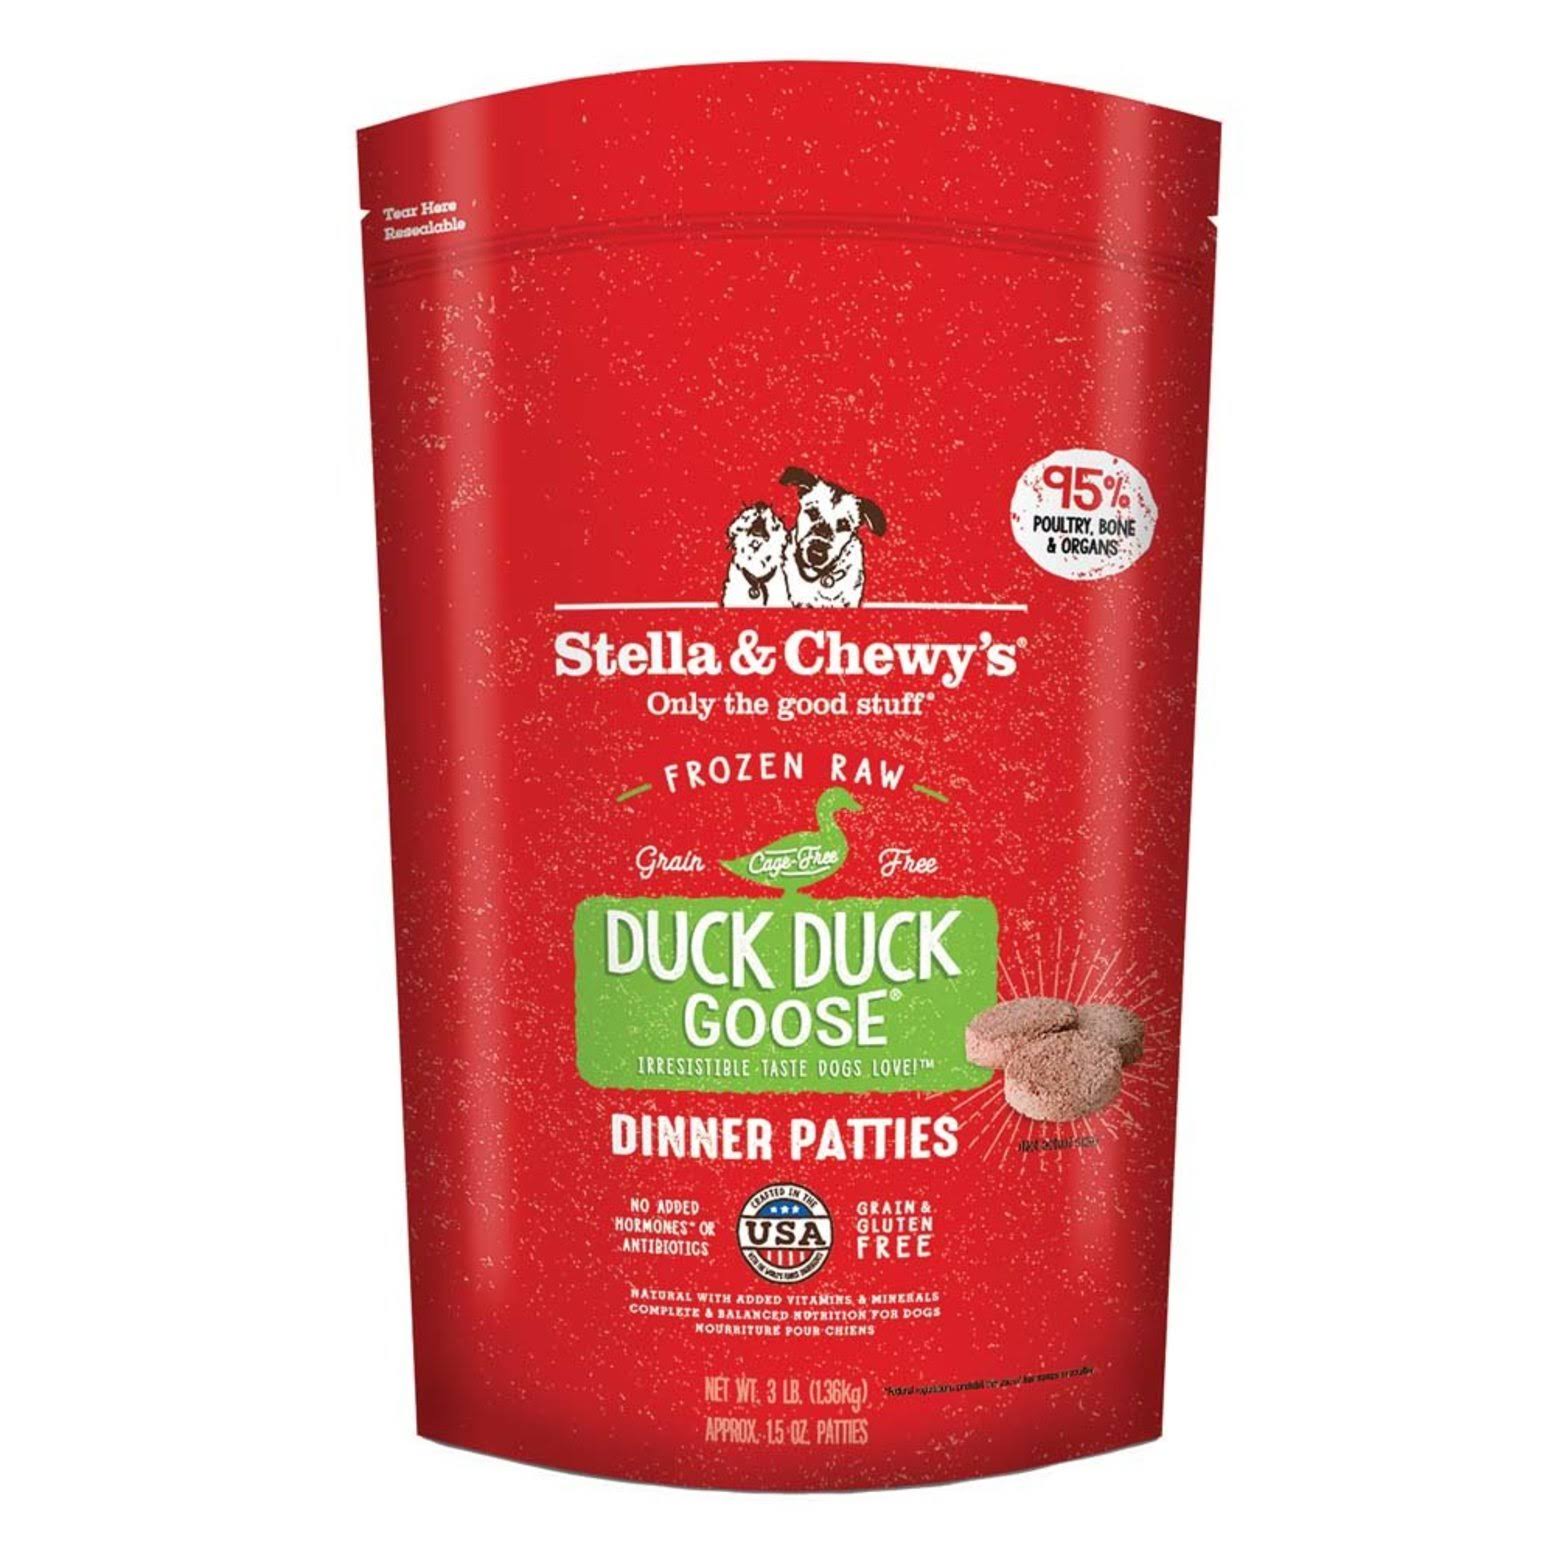 Stella & Chewy's Dog Food - Duck Duck Goose Dinner